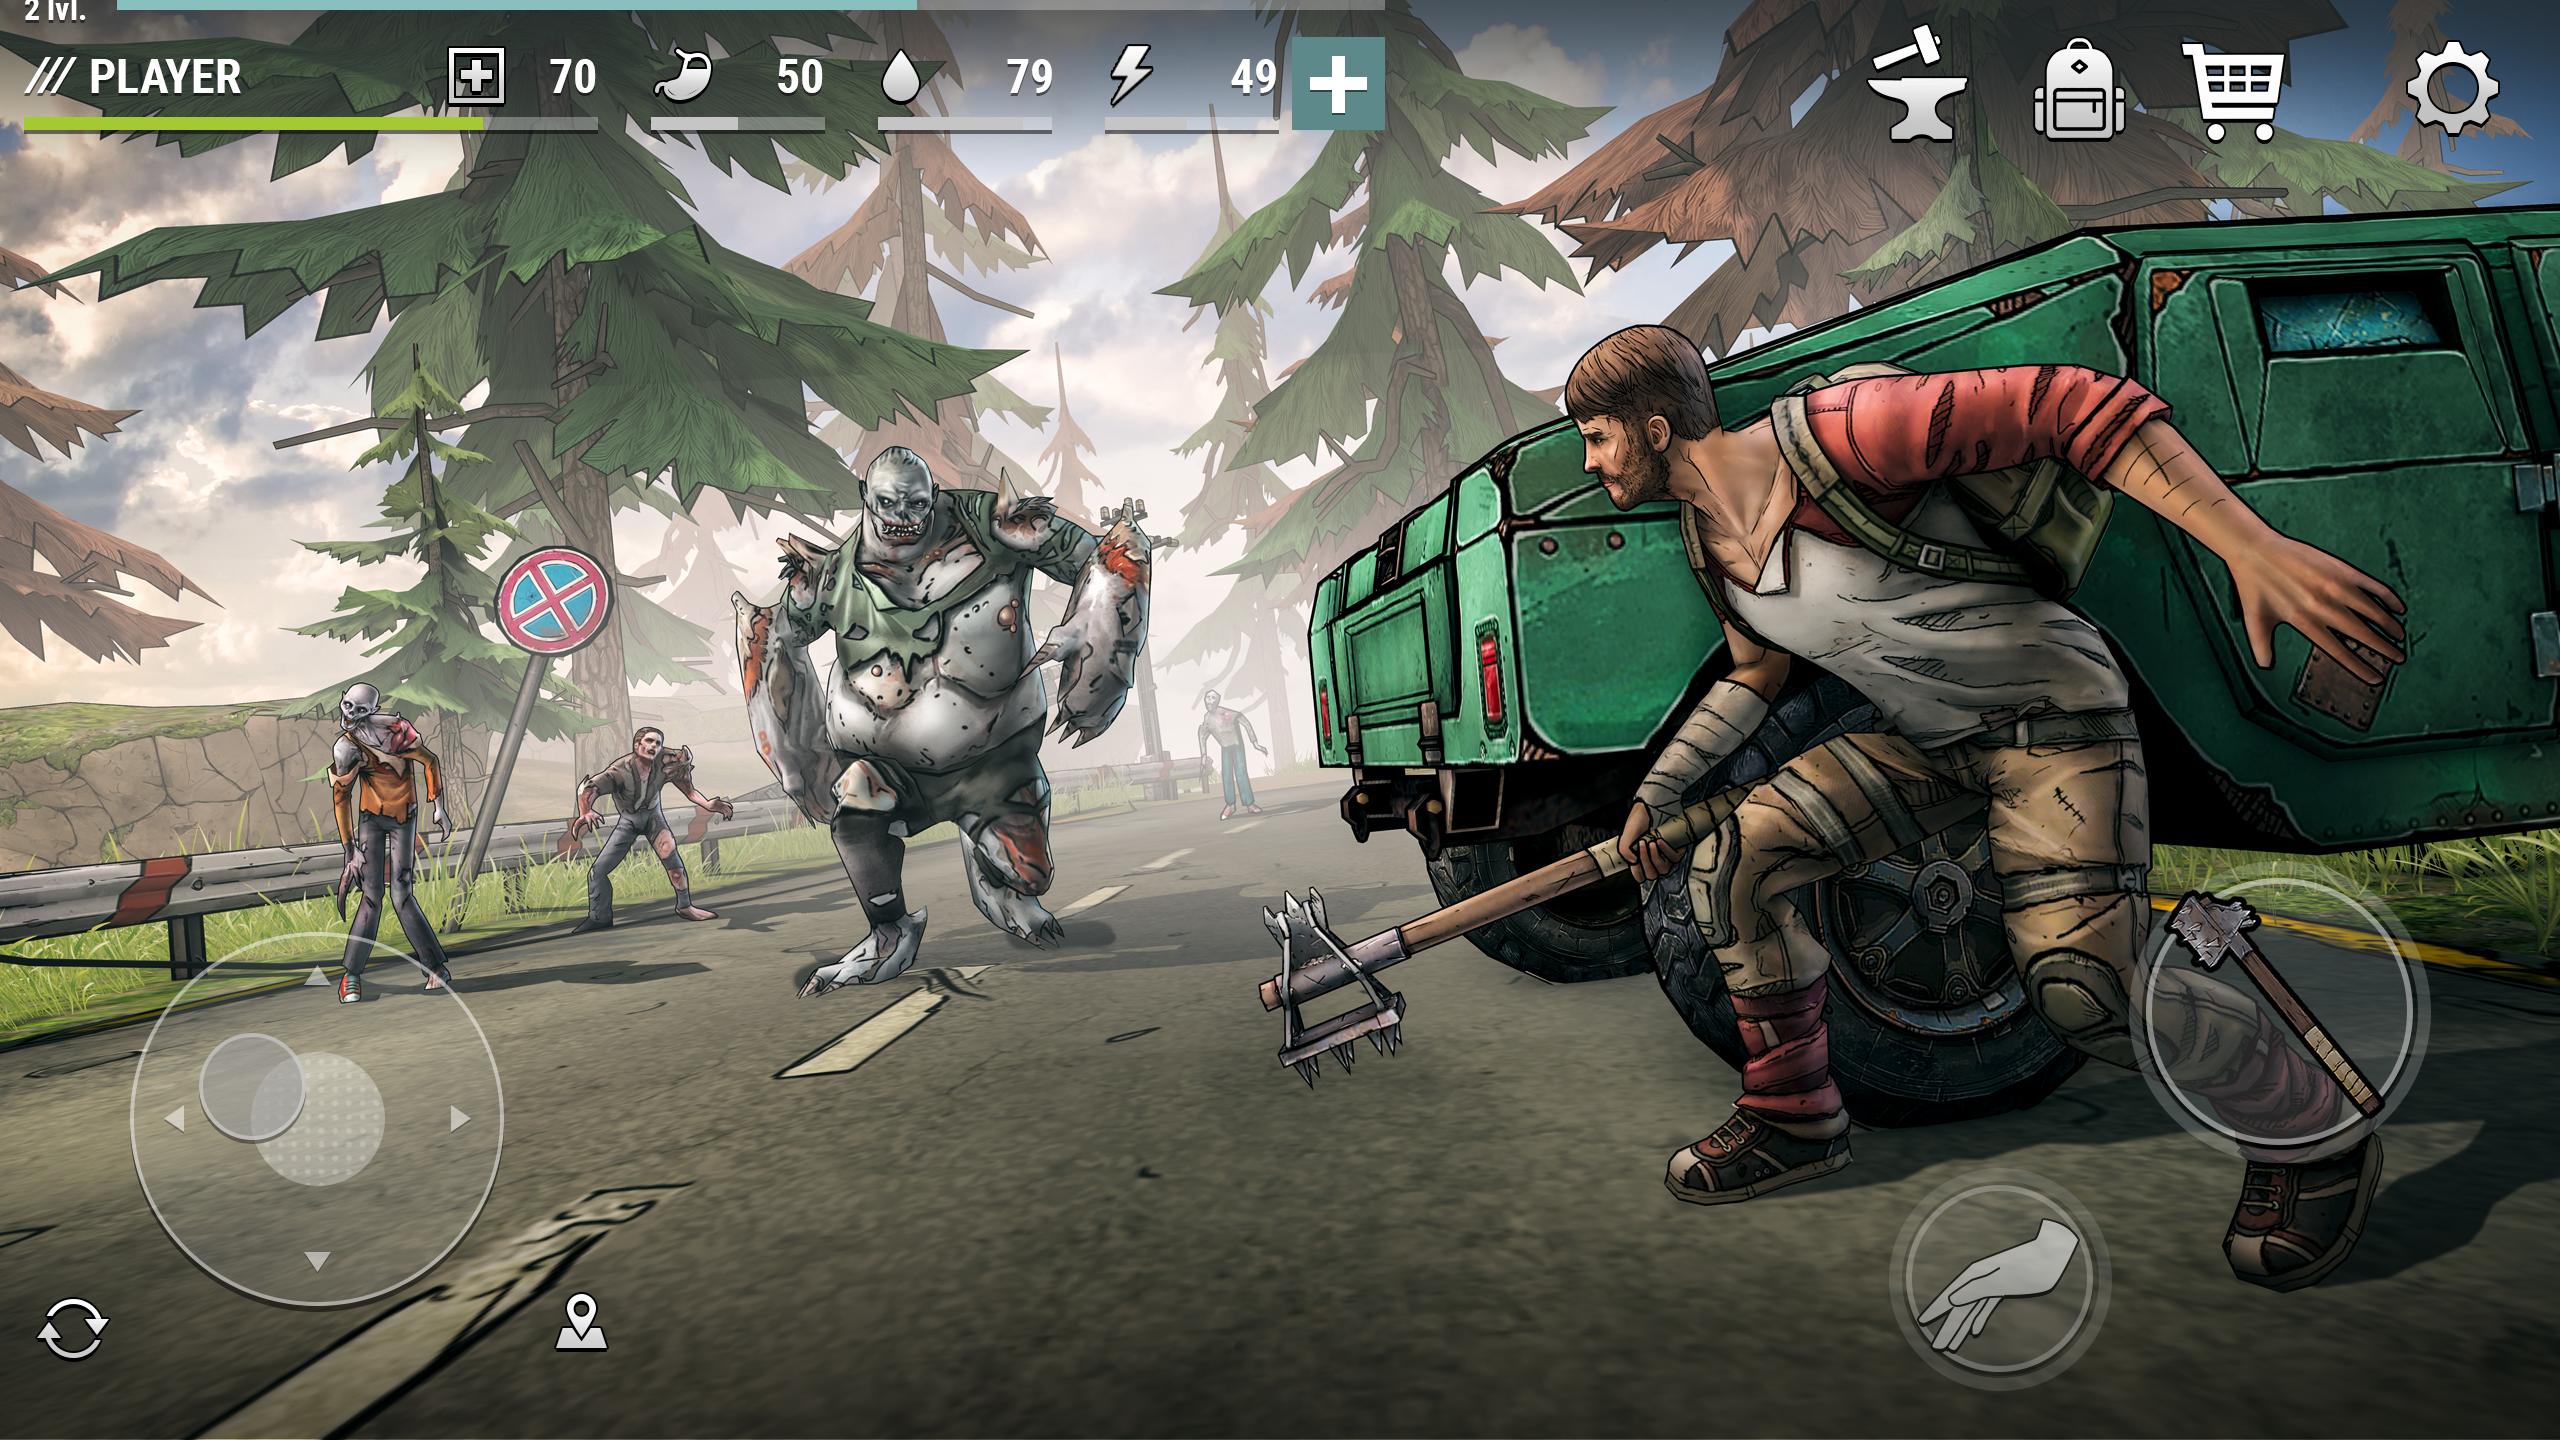 Download Days Gone Hints Zombie Game MOD APK v1.0 for Android